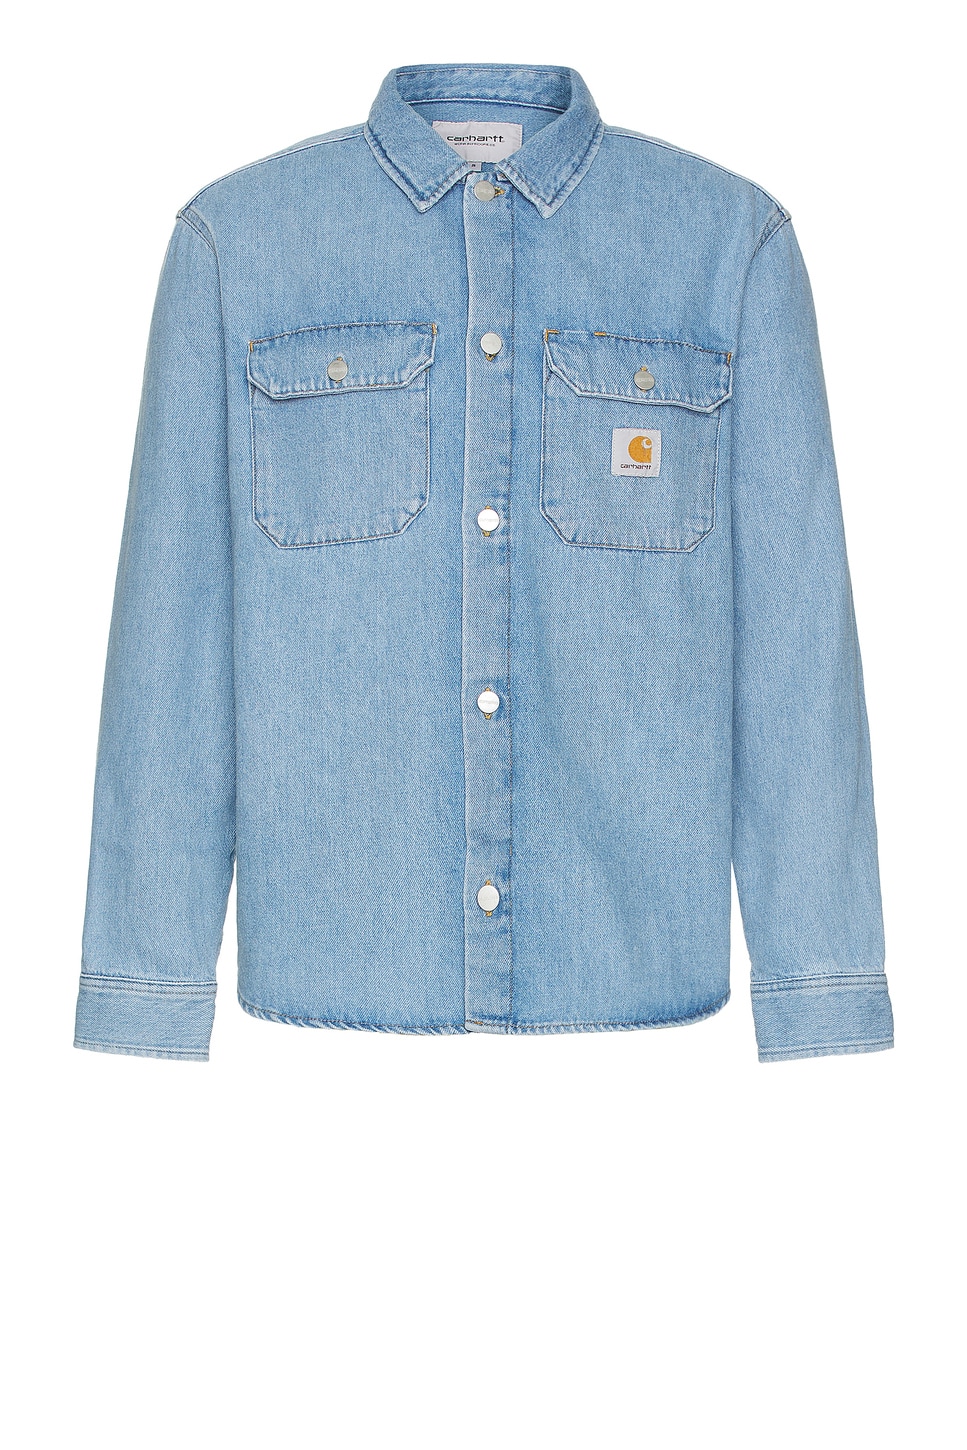 Image 1 of Carhartt WIP Harvey Shirt Jacket in Blue Stone Bleached